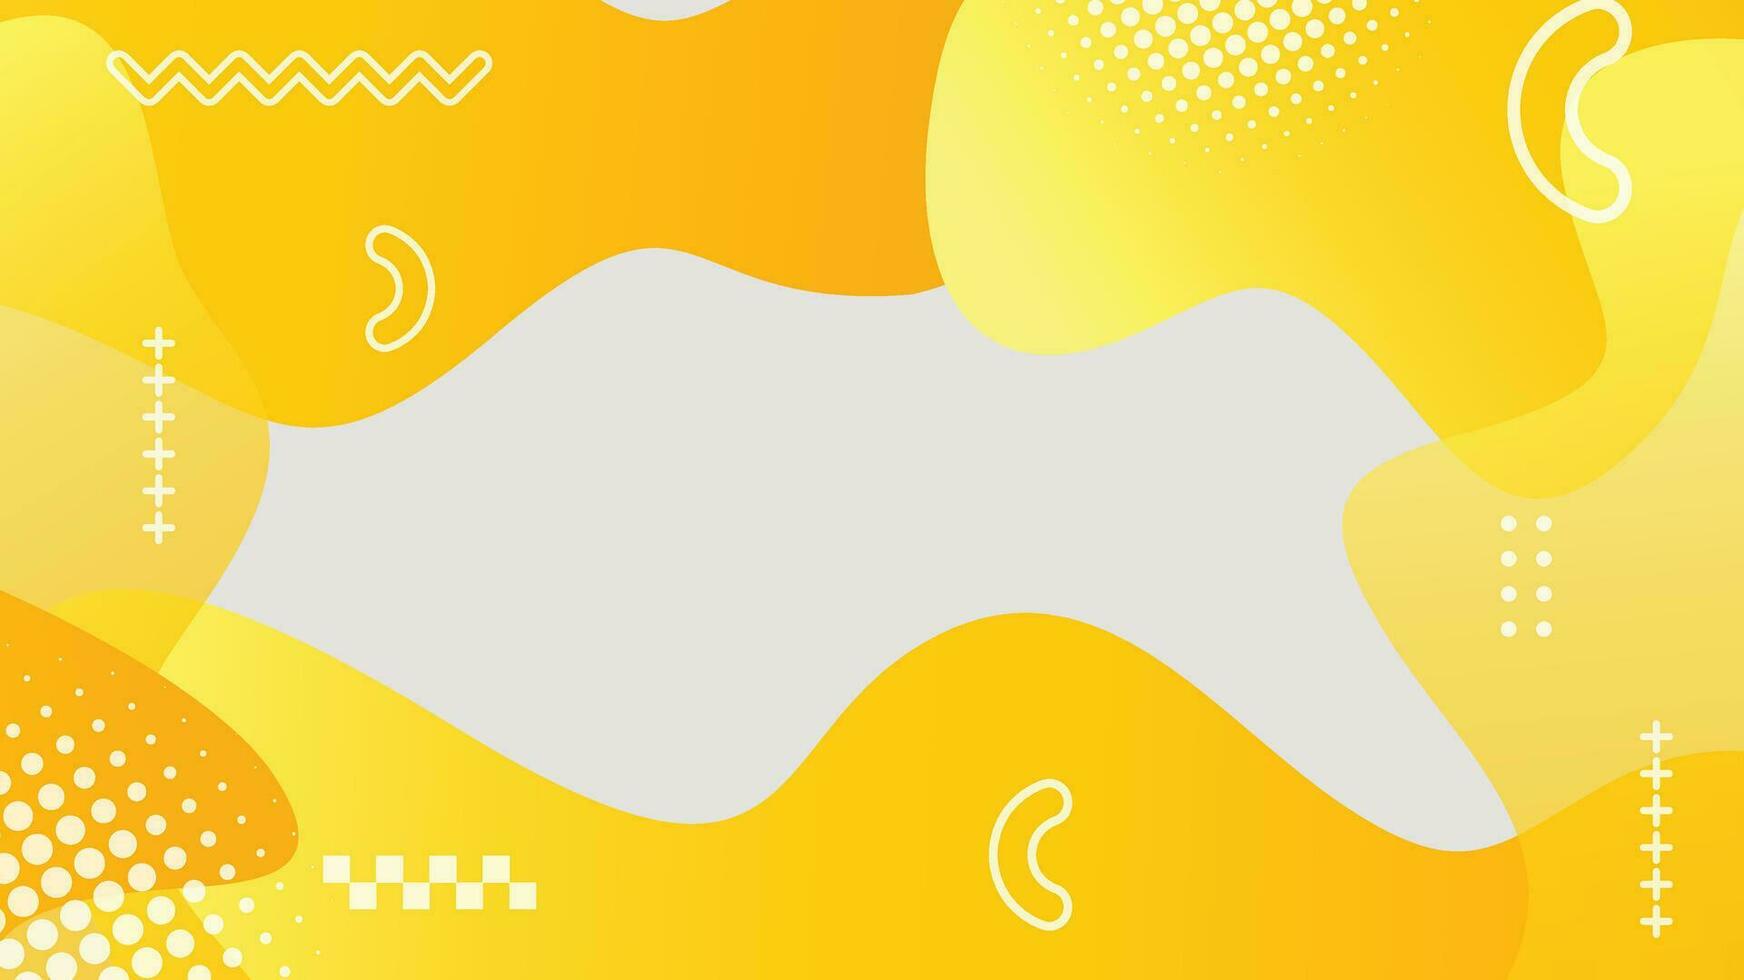 Prinwhite and yellow dynamic fluid shapes abstract background vector